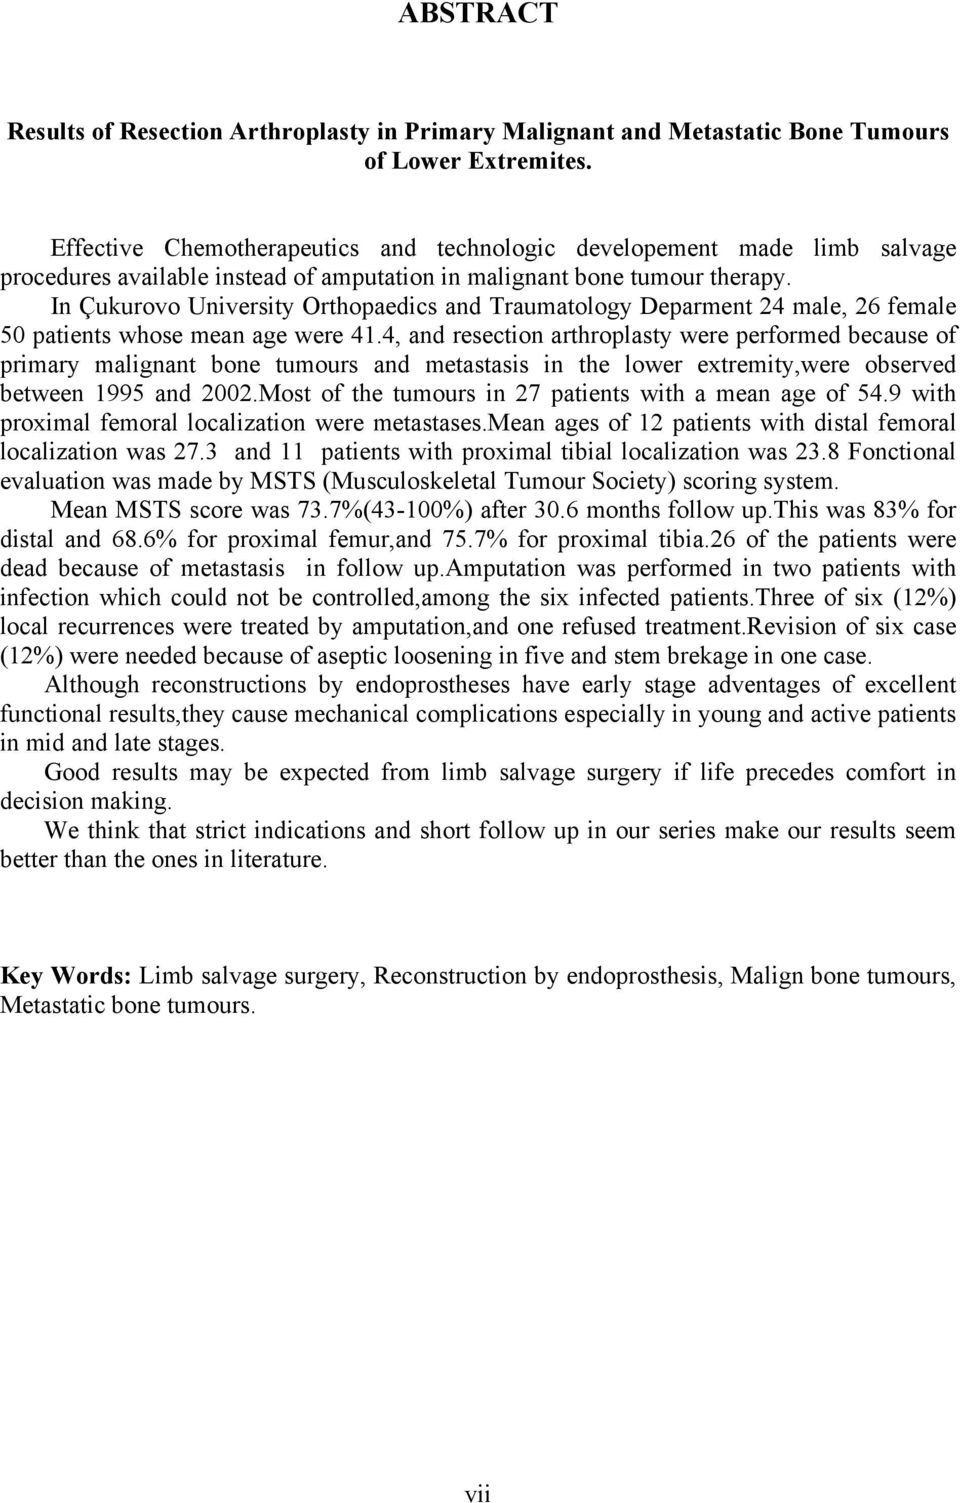 In Çukurovo University Orthopaedics and Traumatology Deparment 24 male, 26 female 50 patients whose mean age were 41.